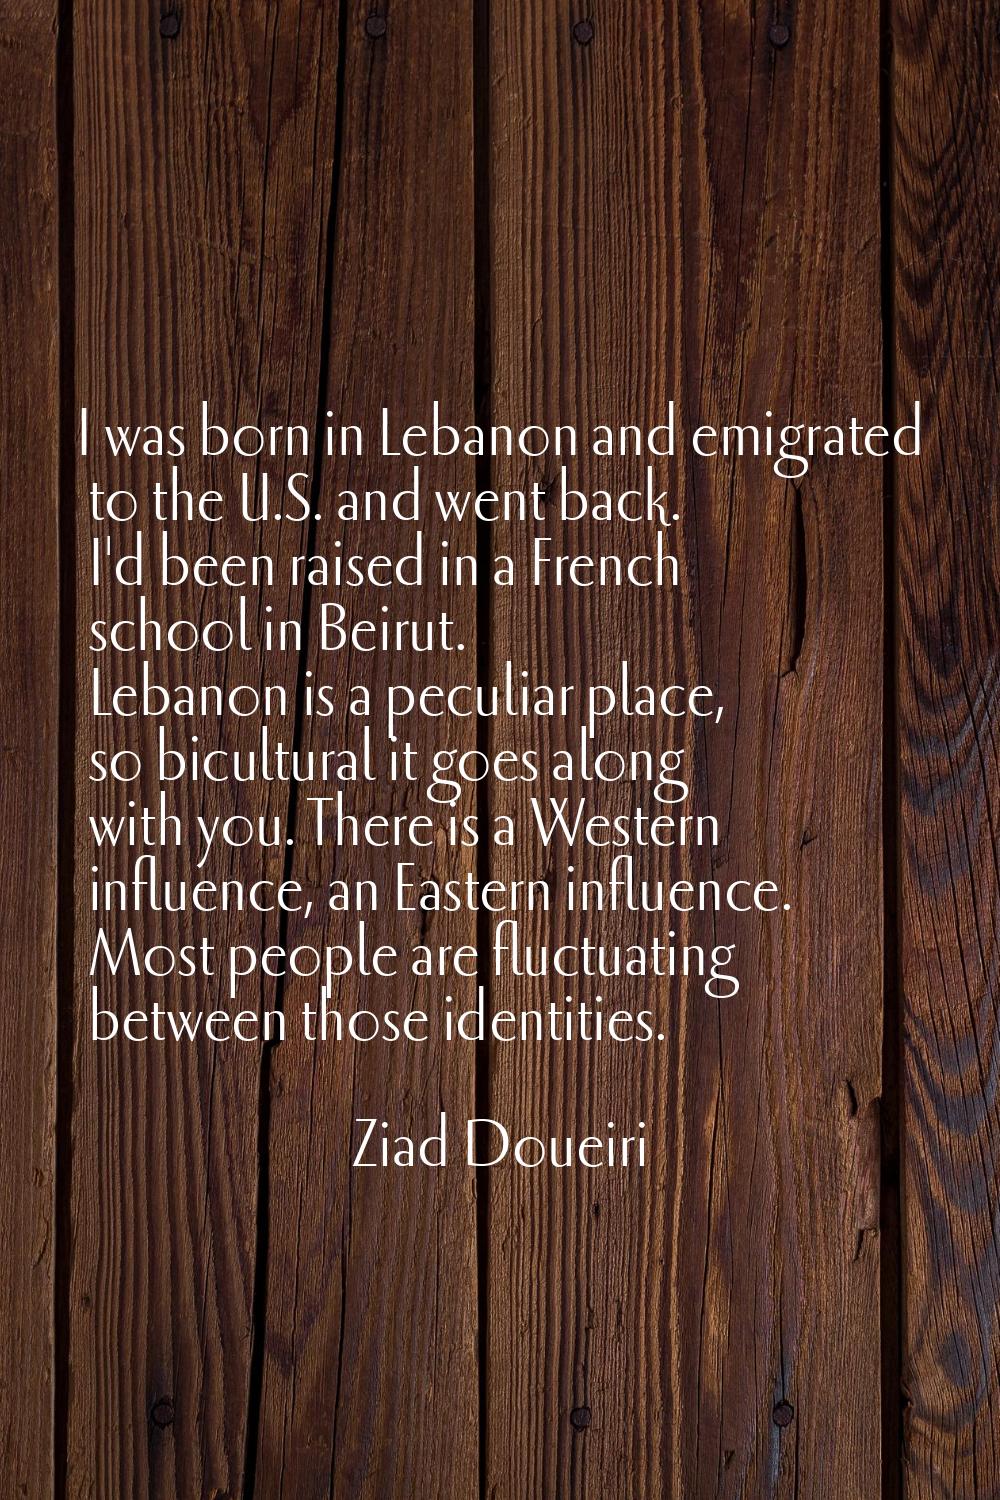 I was born in Lebanon and emigrated to the U.S. and went back. I'd been raised in a French school i